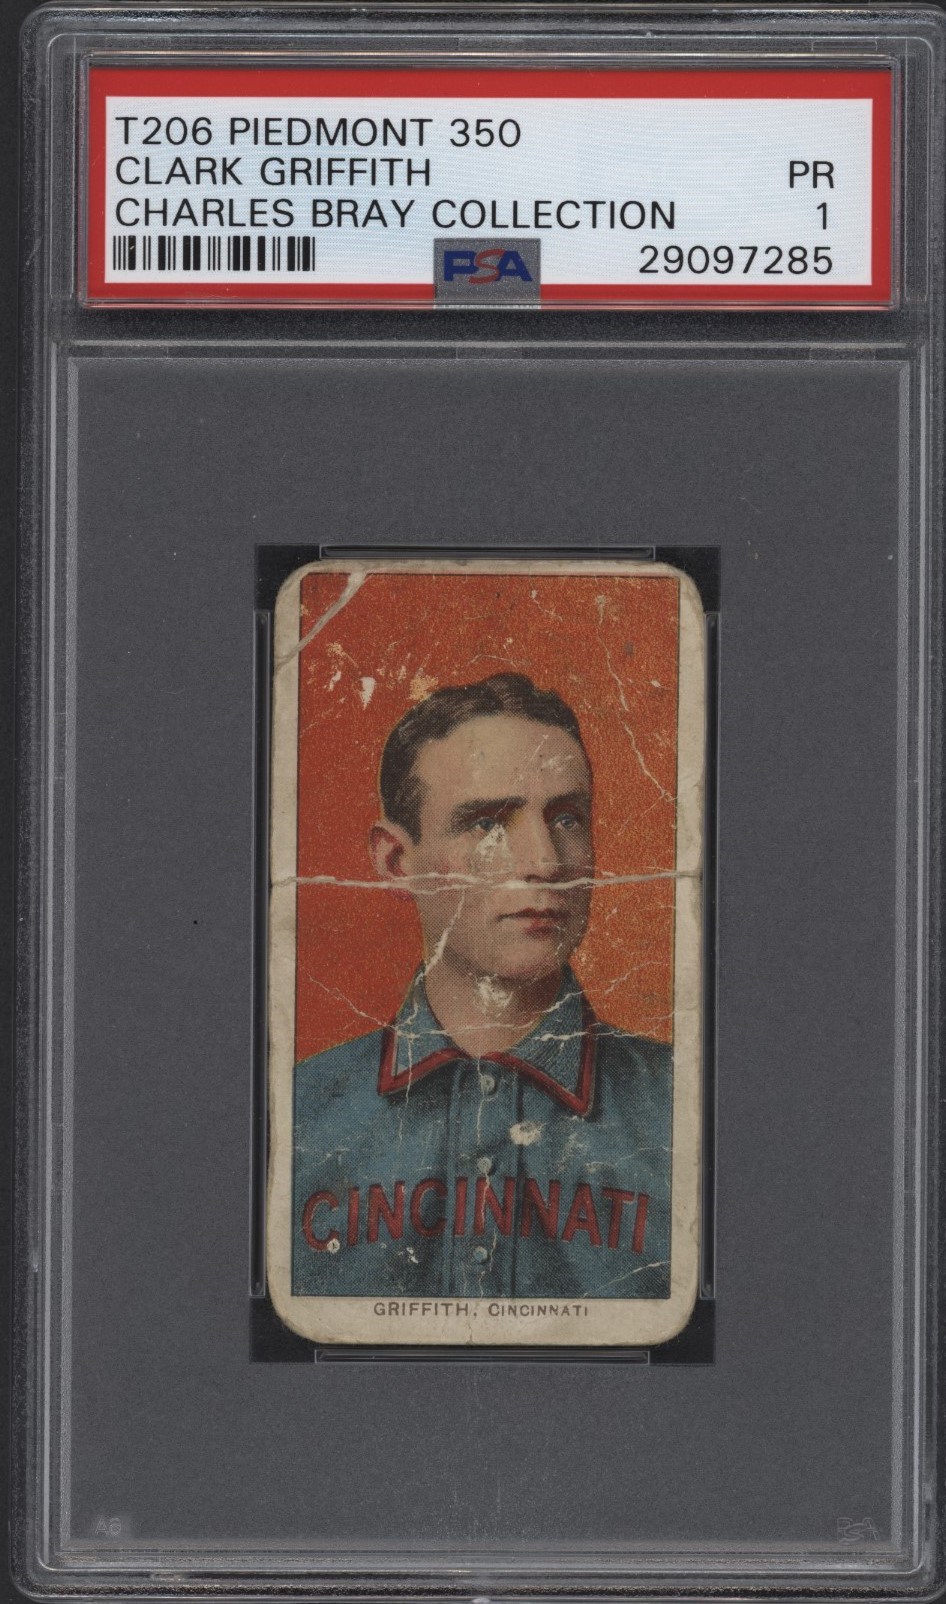 T206 Piedmont 350 Cark Griffith PSA 1 From the Charles Bray Collection